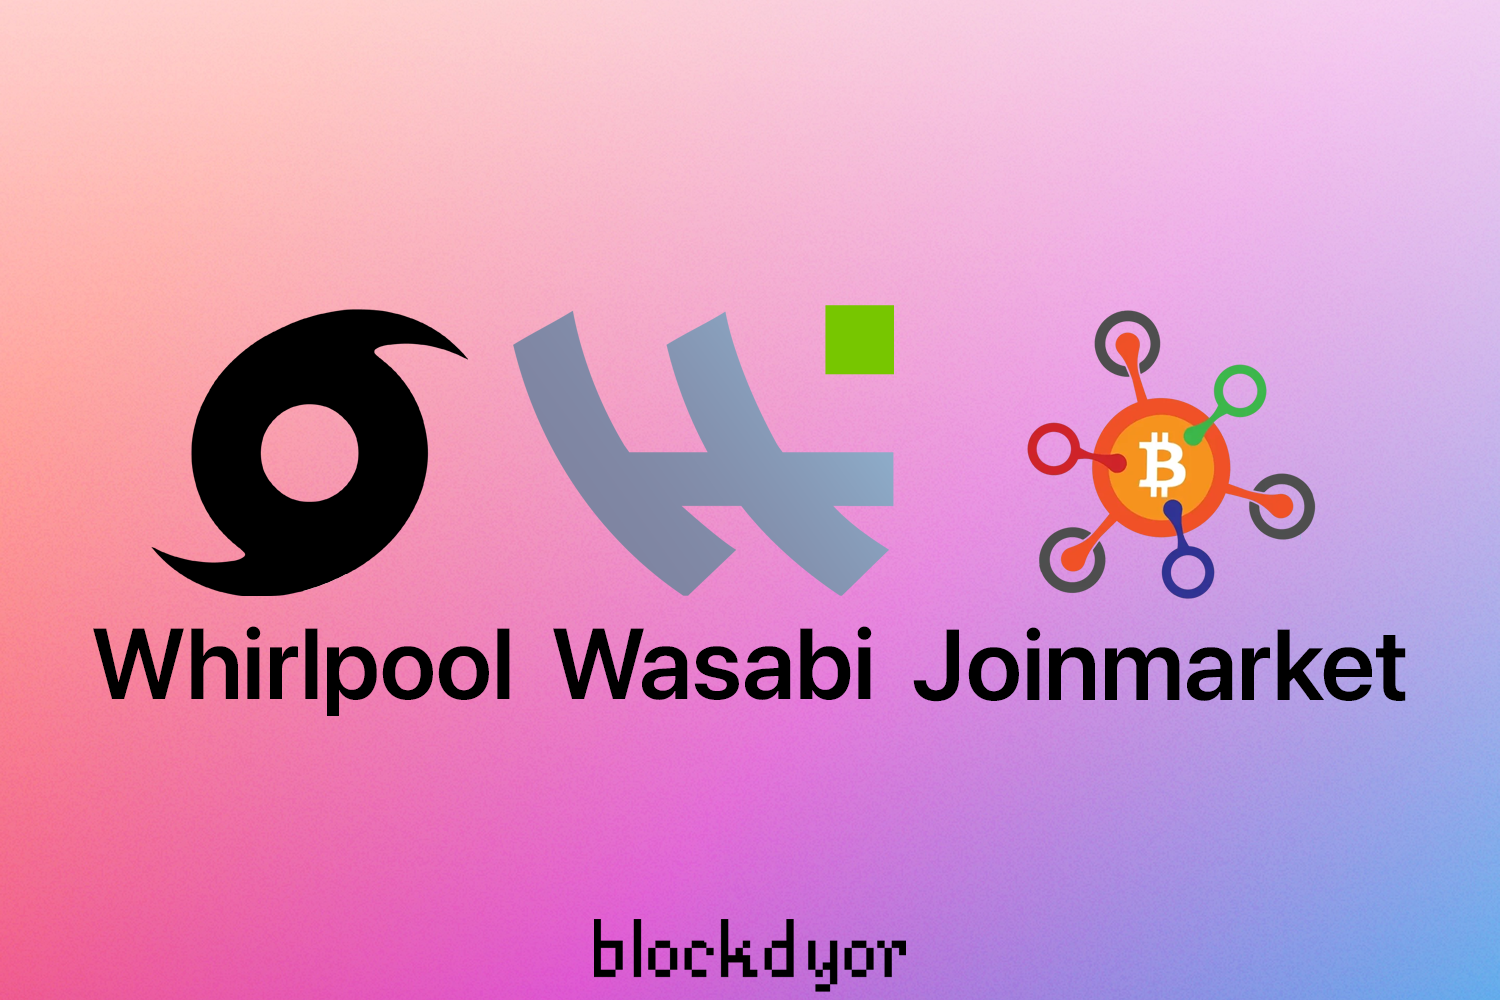 Whirlpool, Wasabi, And JoinMarket